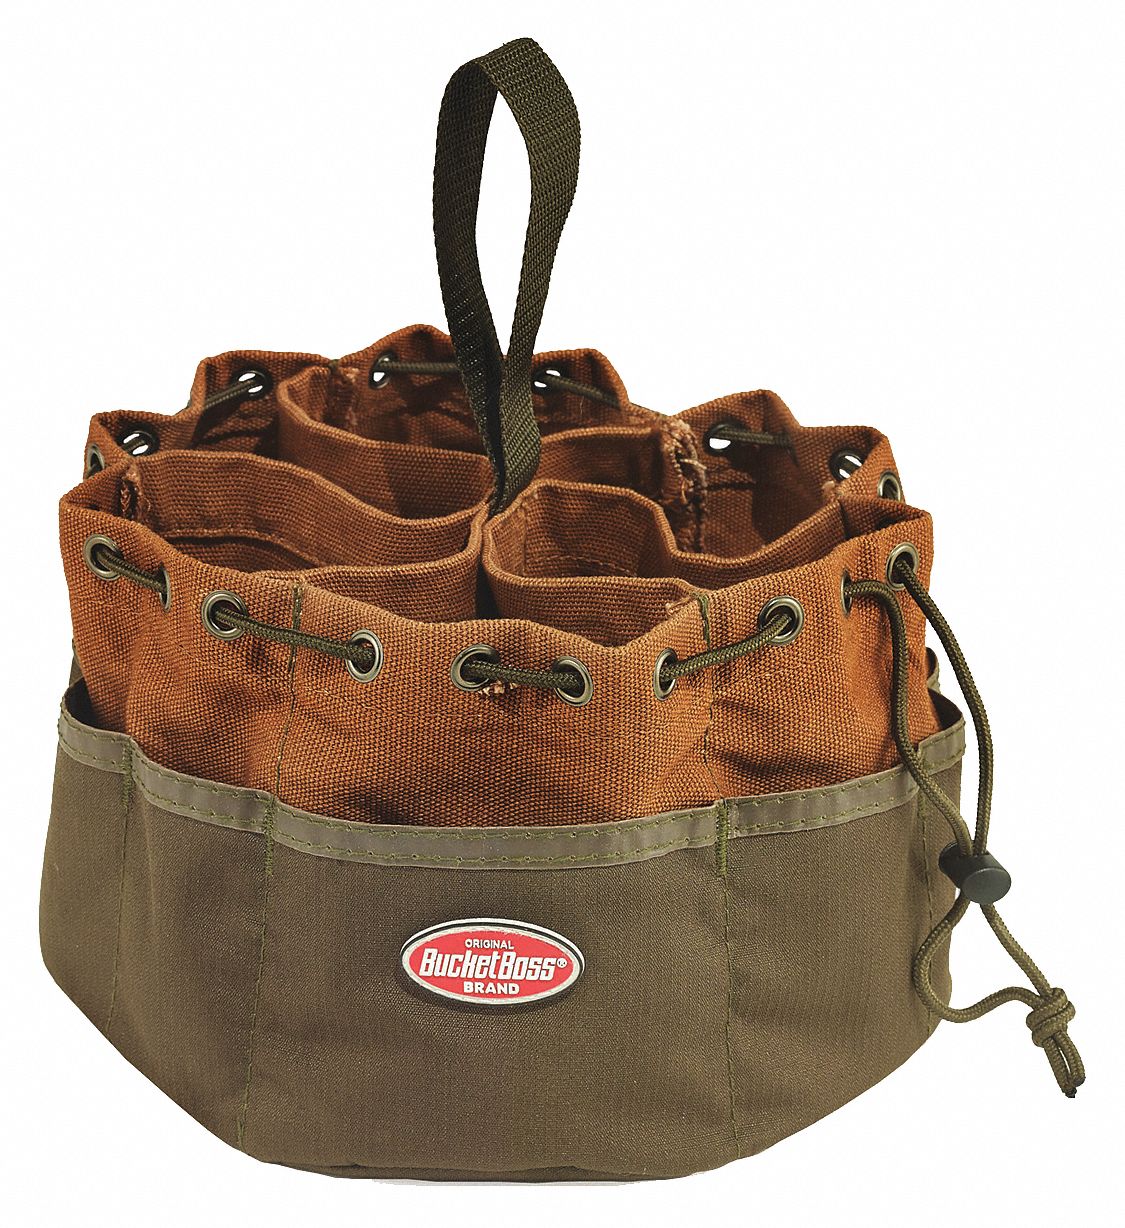 Bucket Bag: 10 in Overall Wd, 6 1/2 in Overall Ht